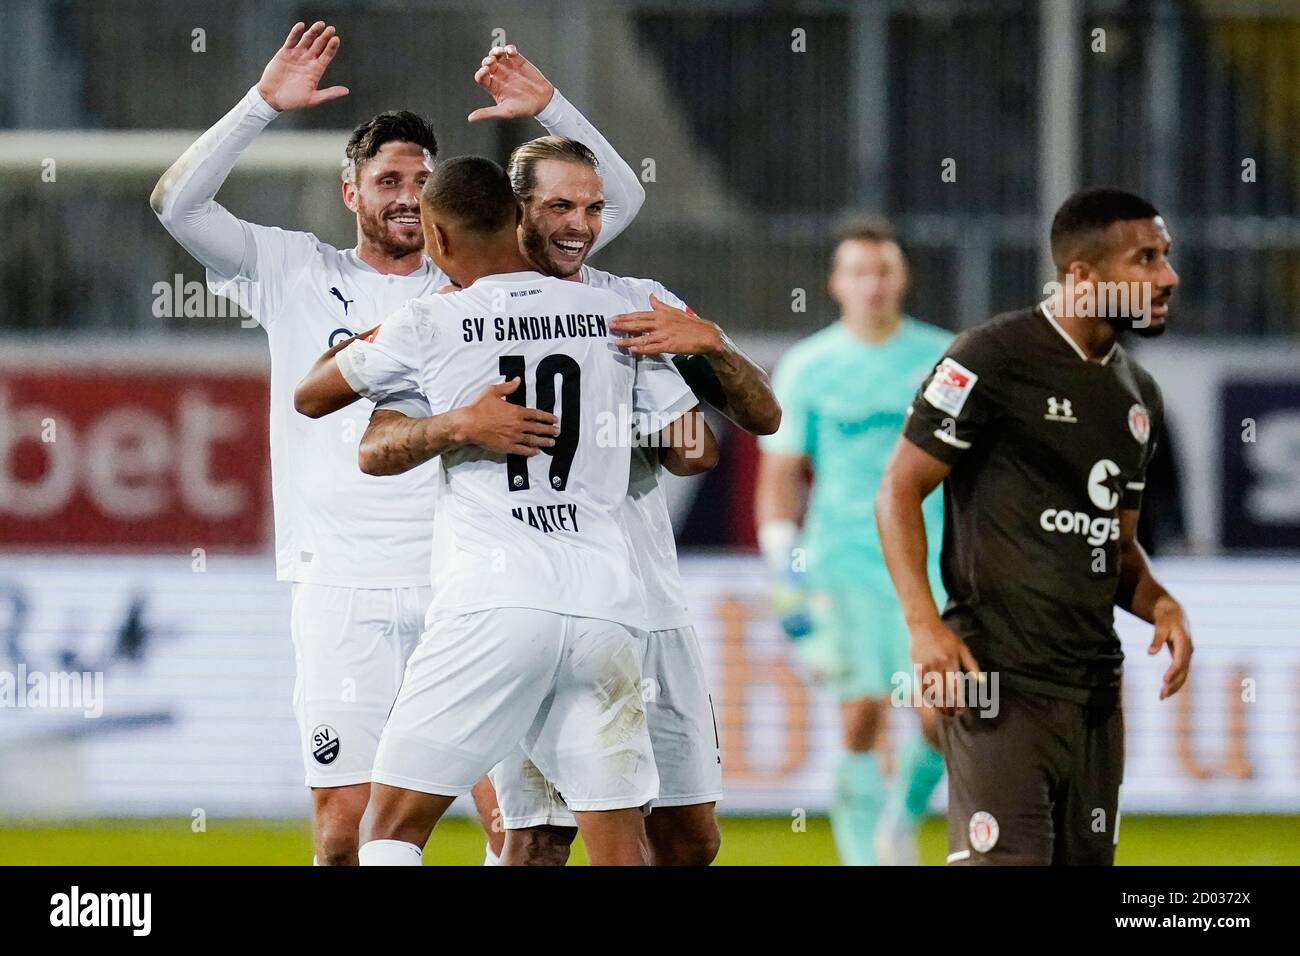 Sandhausen, Germany. 02nd Oct, 2020. Football: 2nd Bundesliga, SV Sandhausen - FC St. Pauli, 3rd matchday, Hardtwaldstadion. Sandhausen's Dennis Diekmeier (3rd from left) cheers for victory with his team mates. Credit: Uwe Anspach/dpa - IMPORTANT NOTE: In accordance with the regulations of the DFL Deutsche Fußball Liga and the DFB Deutscher Fußball-Bund, it is prohibited to exploit or have exploited in the stadium and/or from the game taken photographs in the form of sequence images and/or video-like photo series./dpa/Alamy Live News Stock Photo